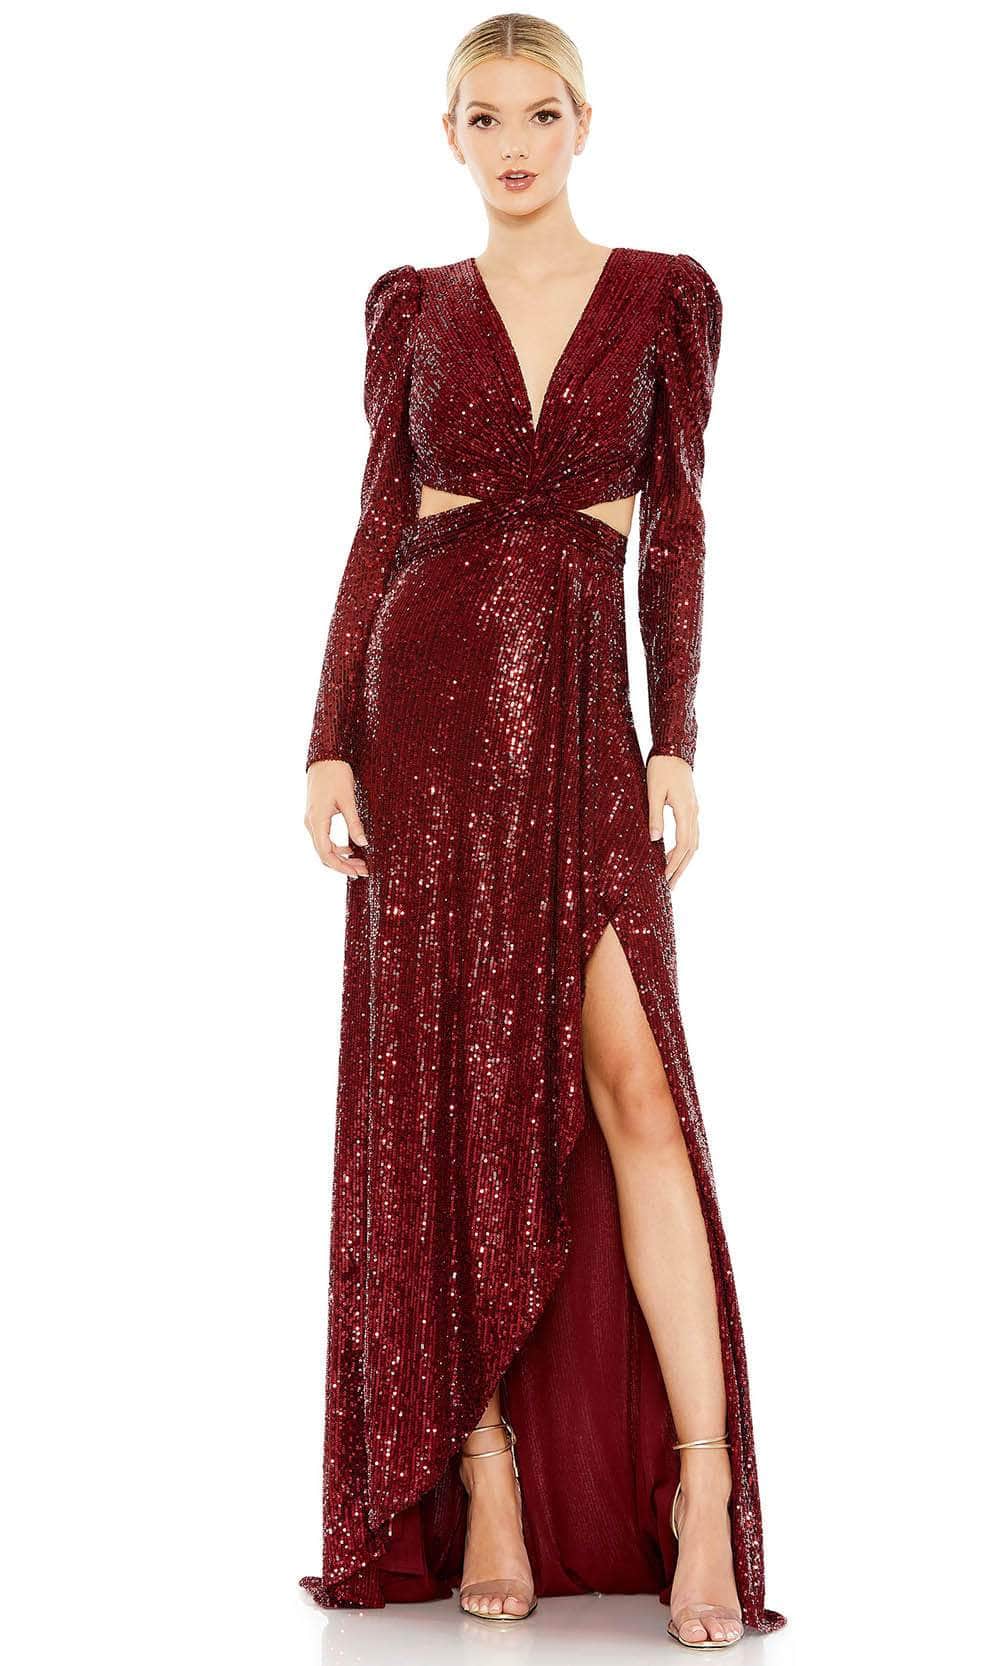 Ieena Duggal 26739 - Long-Sleeved Sequined Evening Gown Prom Dresses 0 / Wine